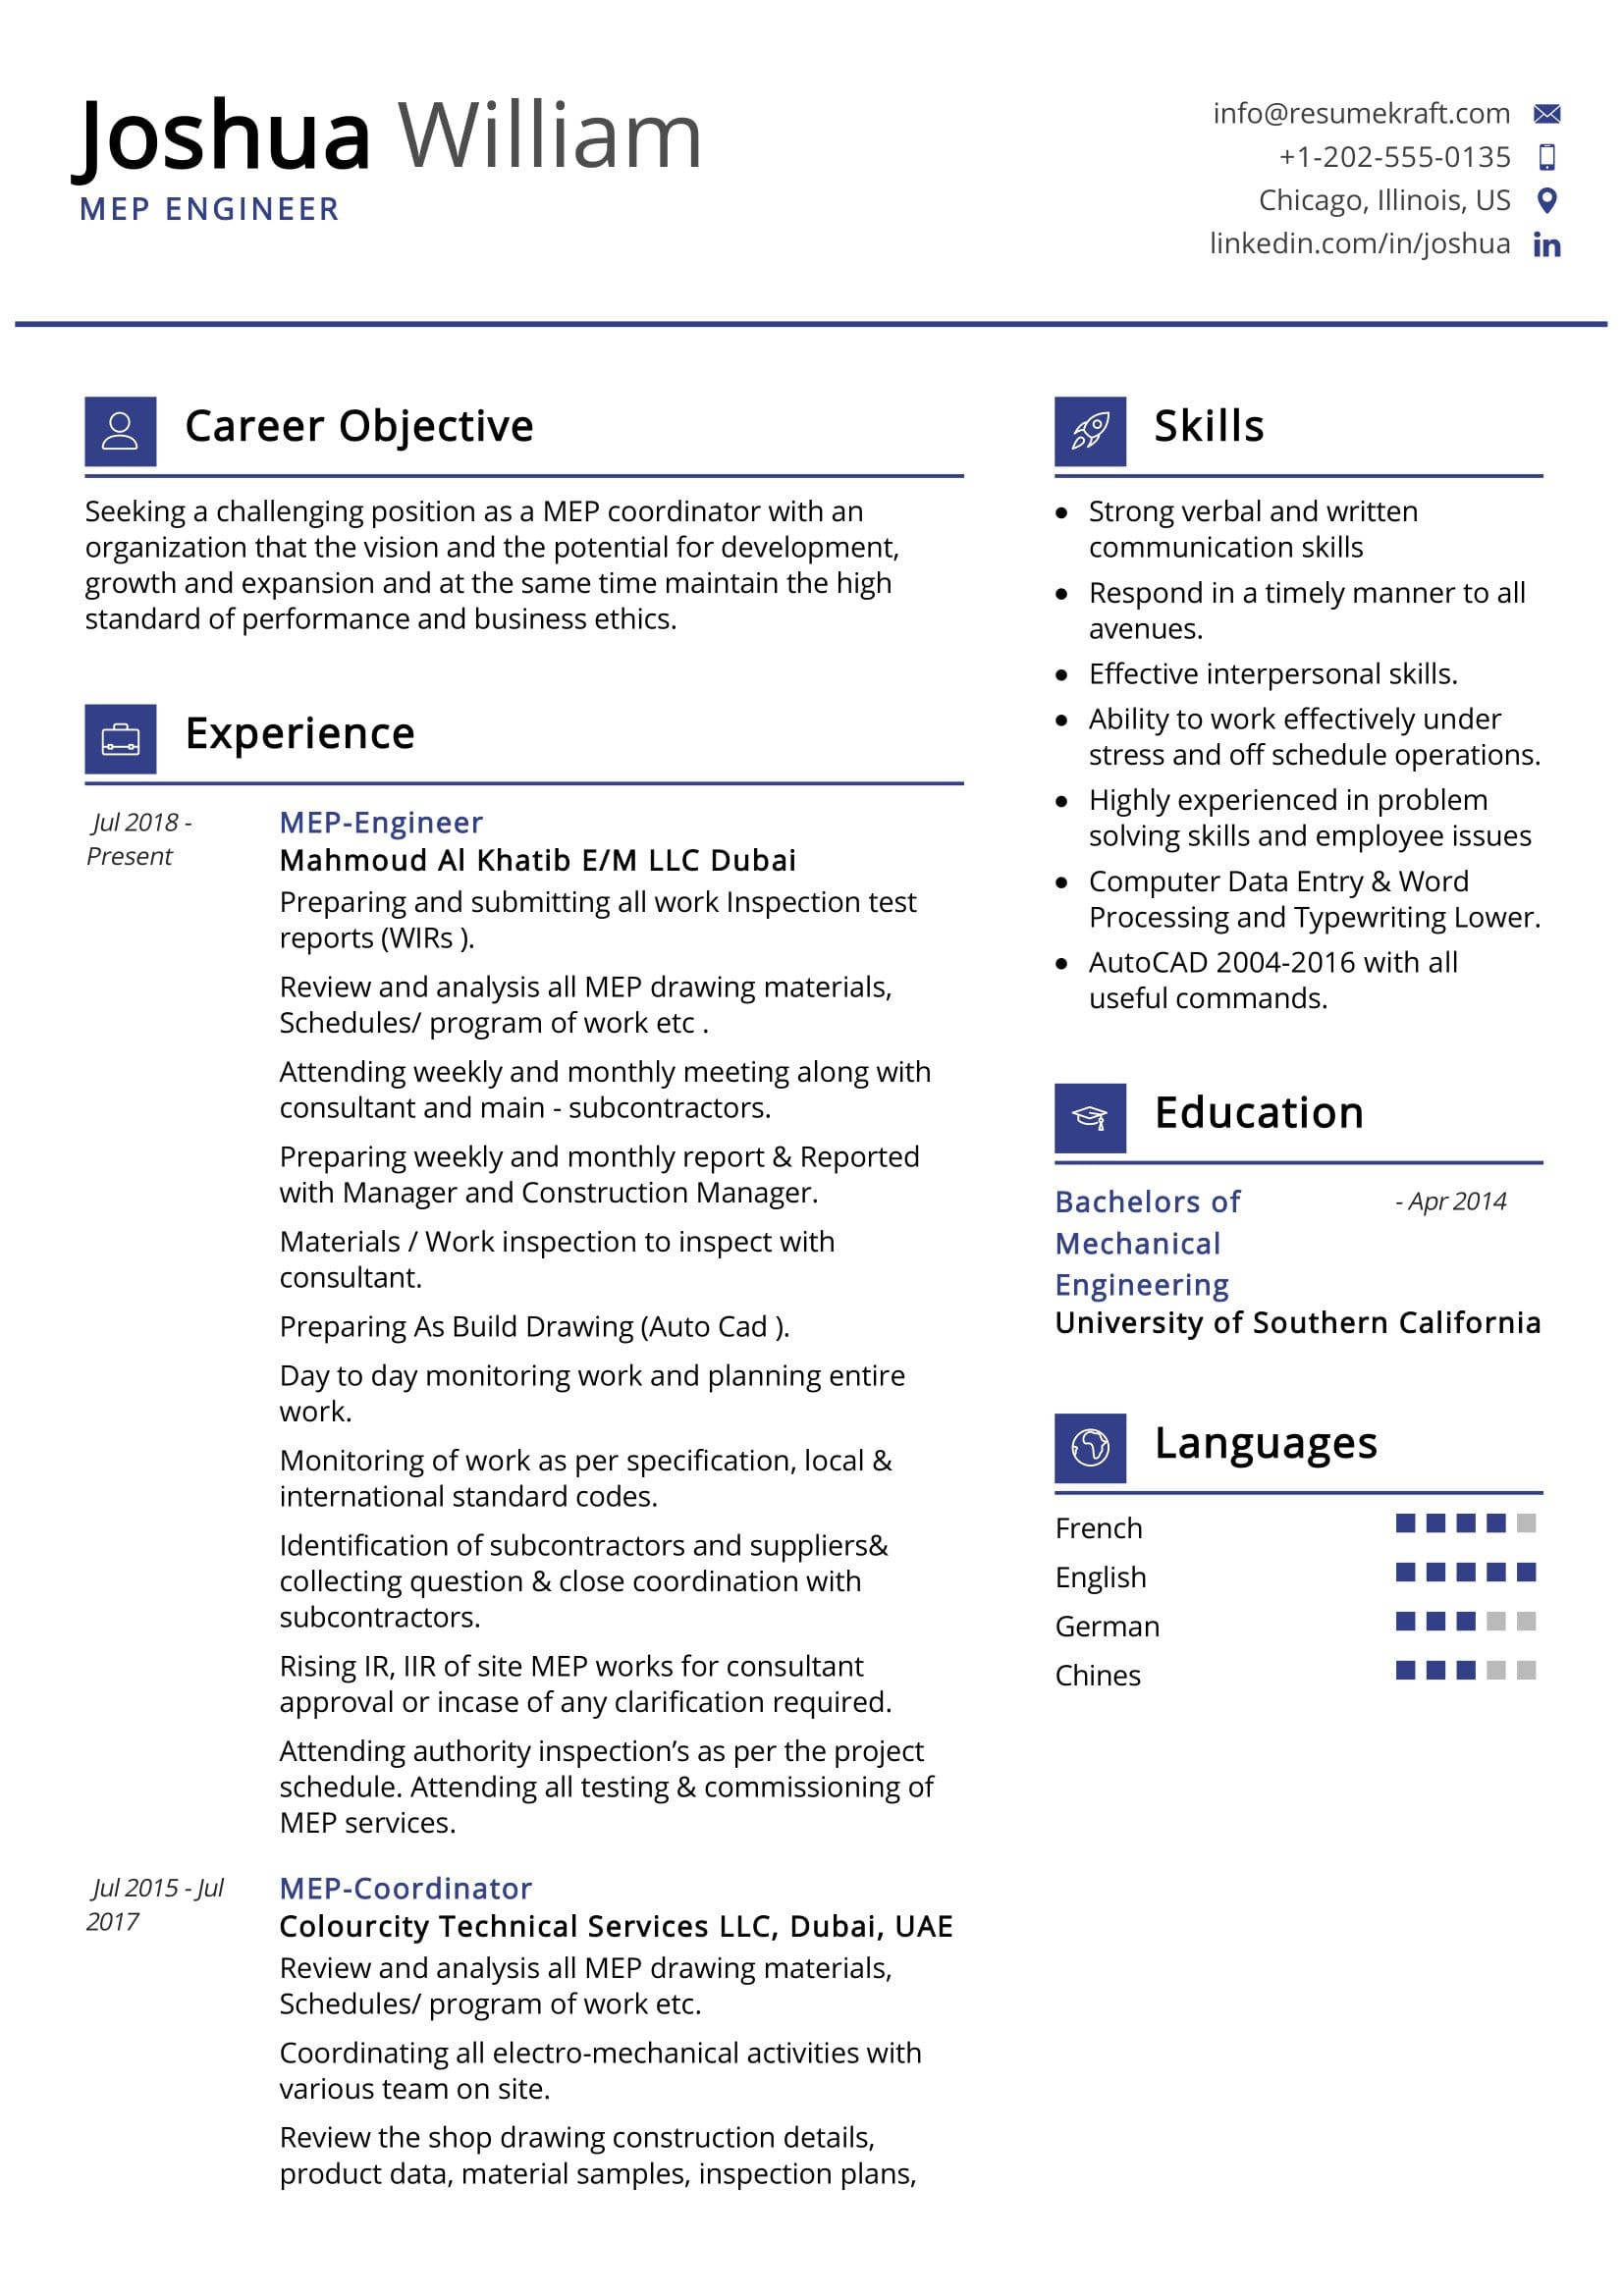 Sample Resume for Utility and Maintenance Engineer Mep Engineer Resume Sample 2022 Writing Tips – Resumekraft